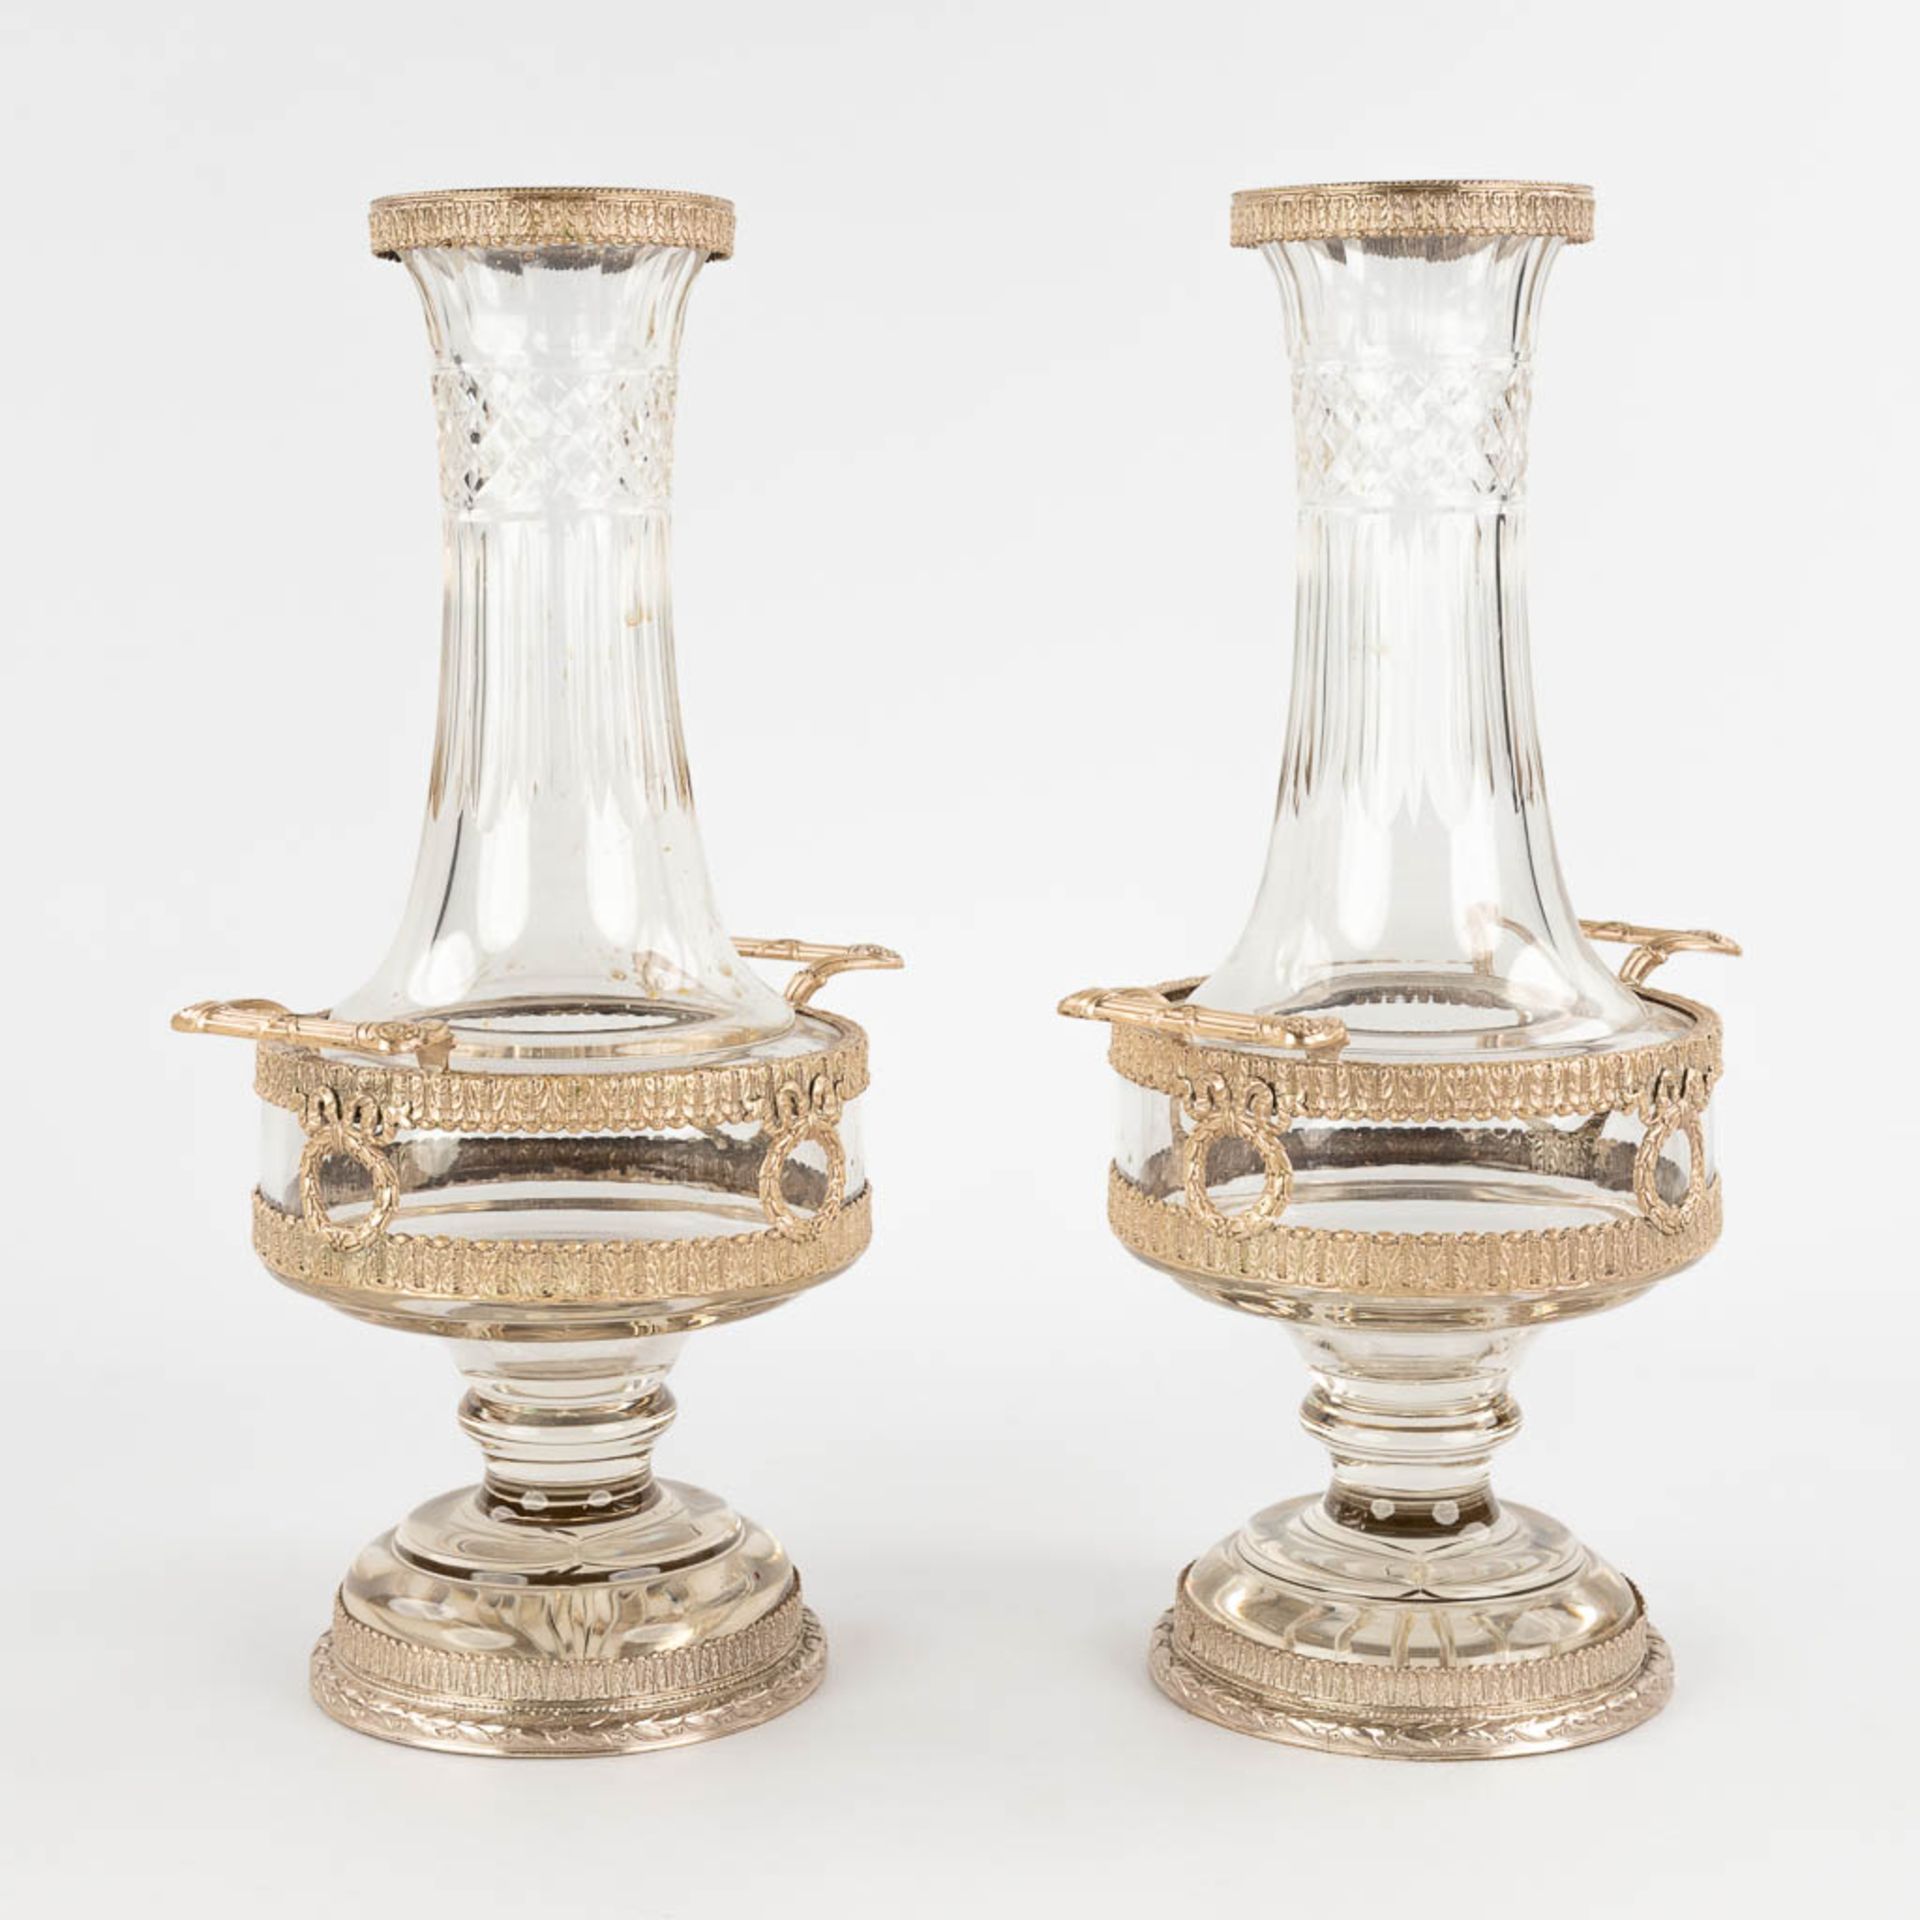 A pair of decorative vases, silver-plated bronze on glass, Neoclassical. 20th C. (D:14 x W:18 x H:33 - Bild 3 aus 16